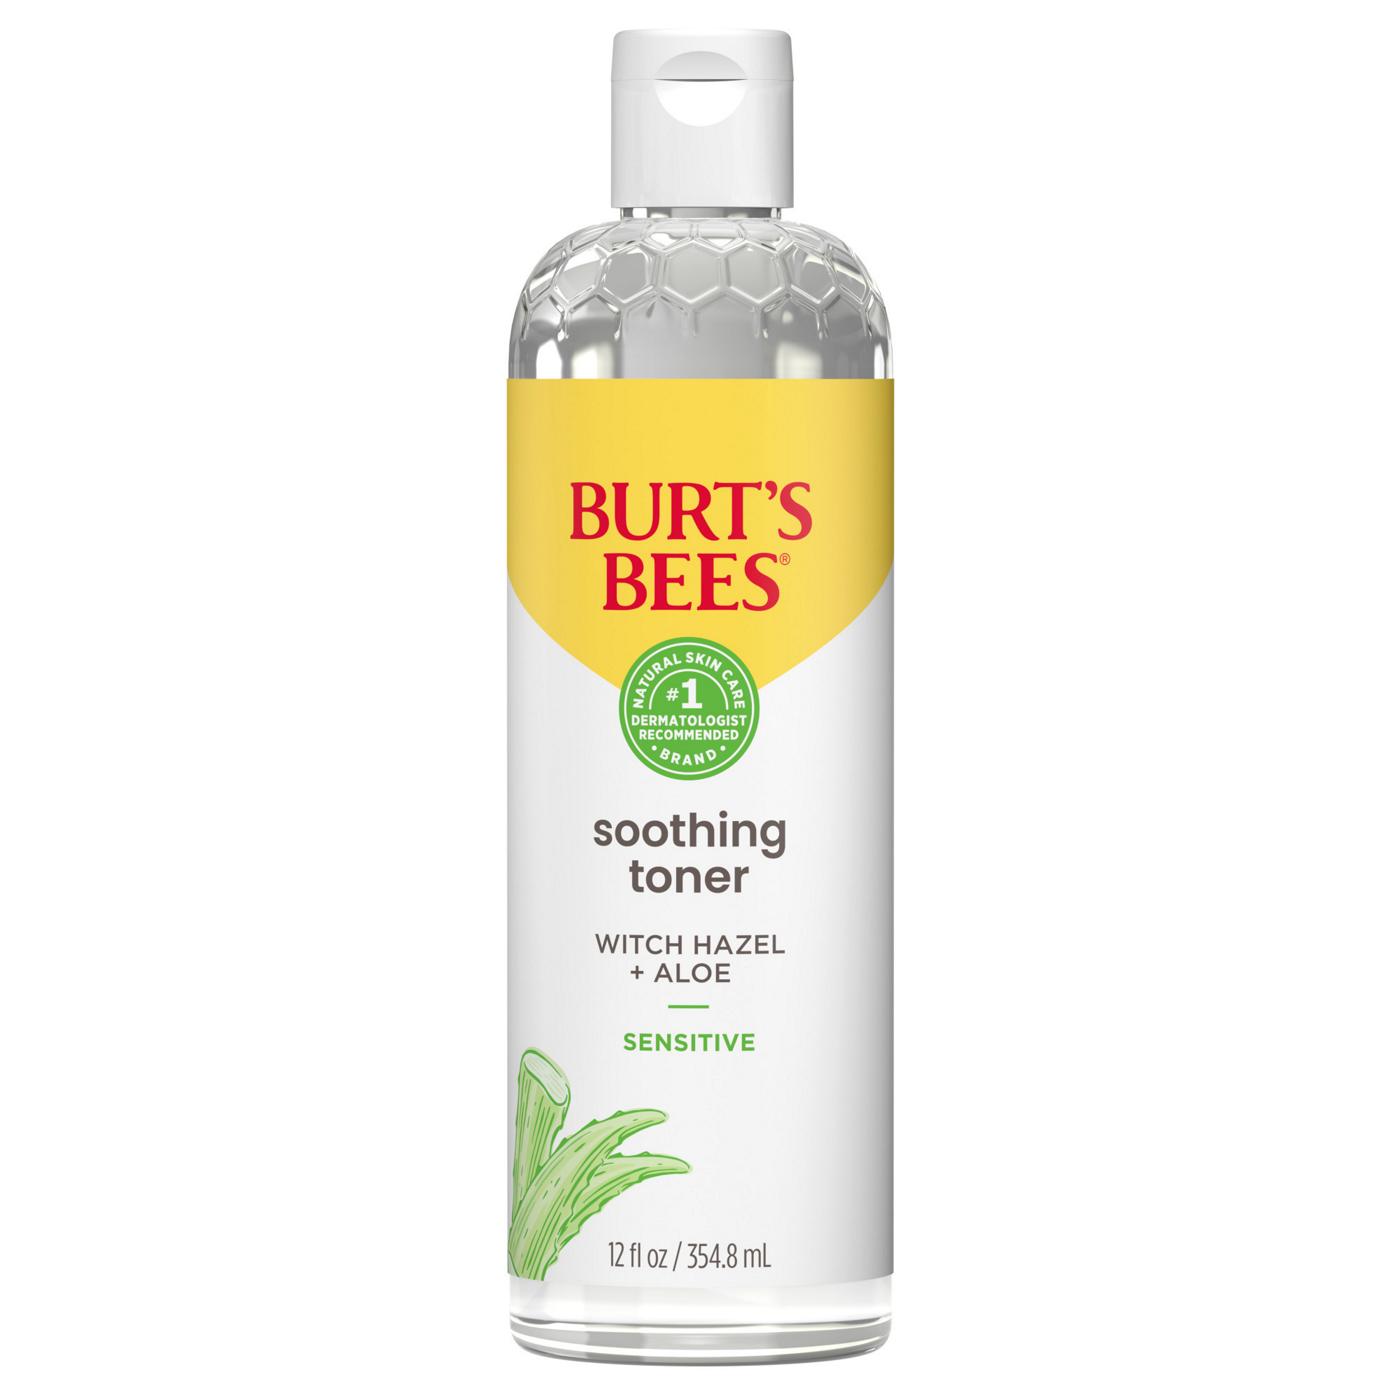 Burt's Bees Soothing Toner with Witch Hazel and Aloe; image 1 of 9